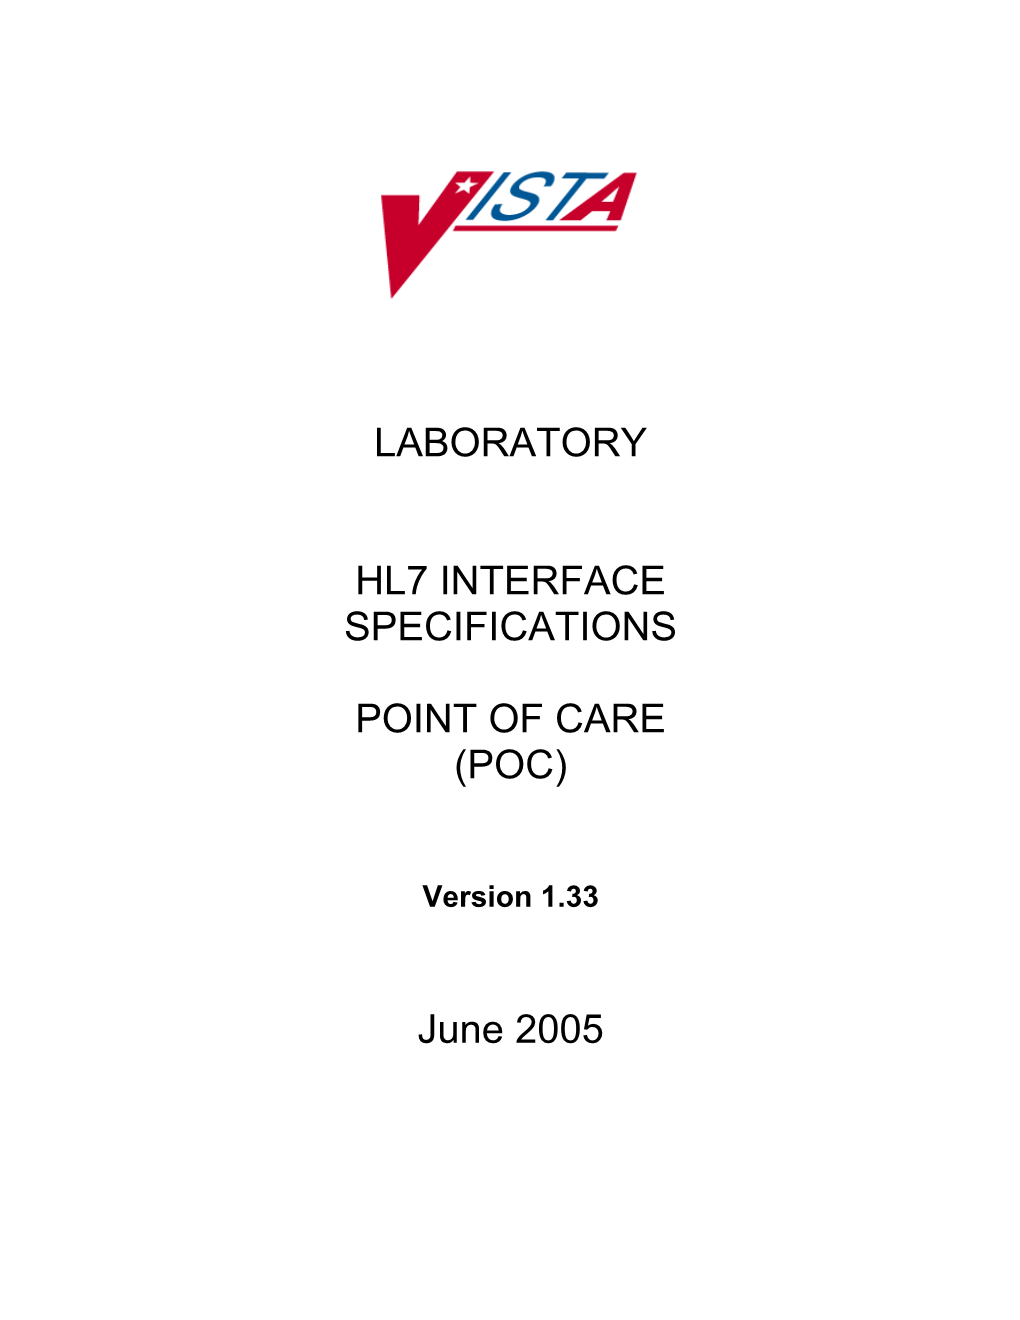 Vista Laboratory HL7 Interface Specification Point of Contact